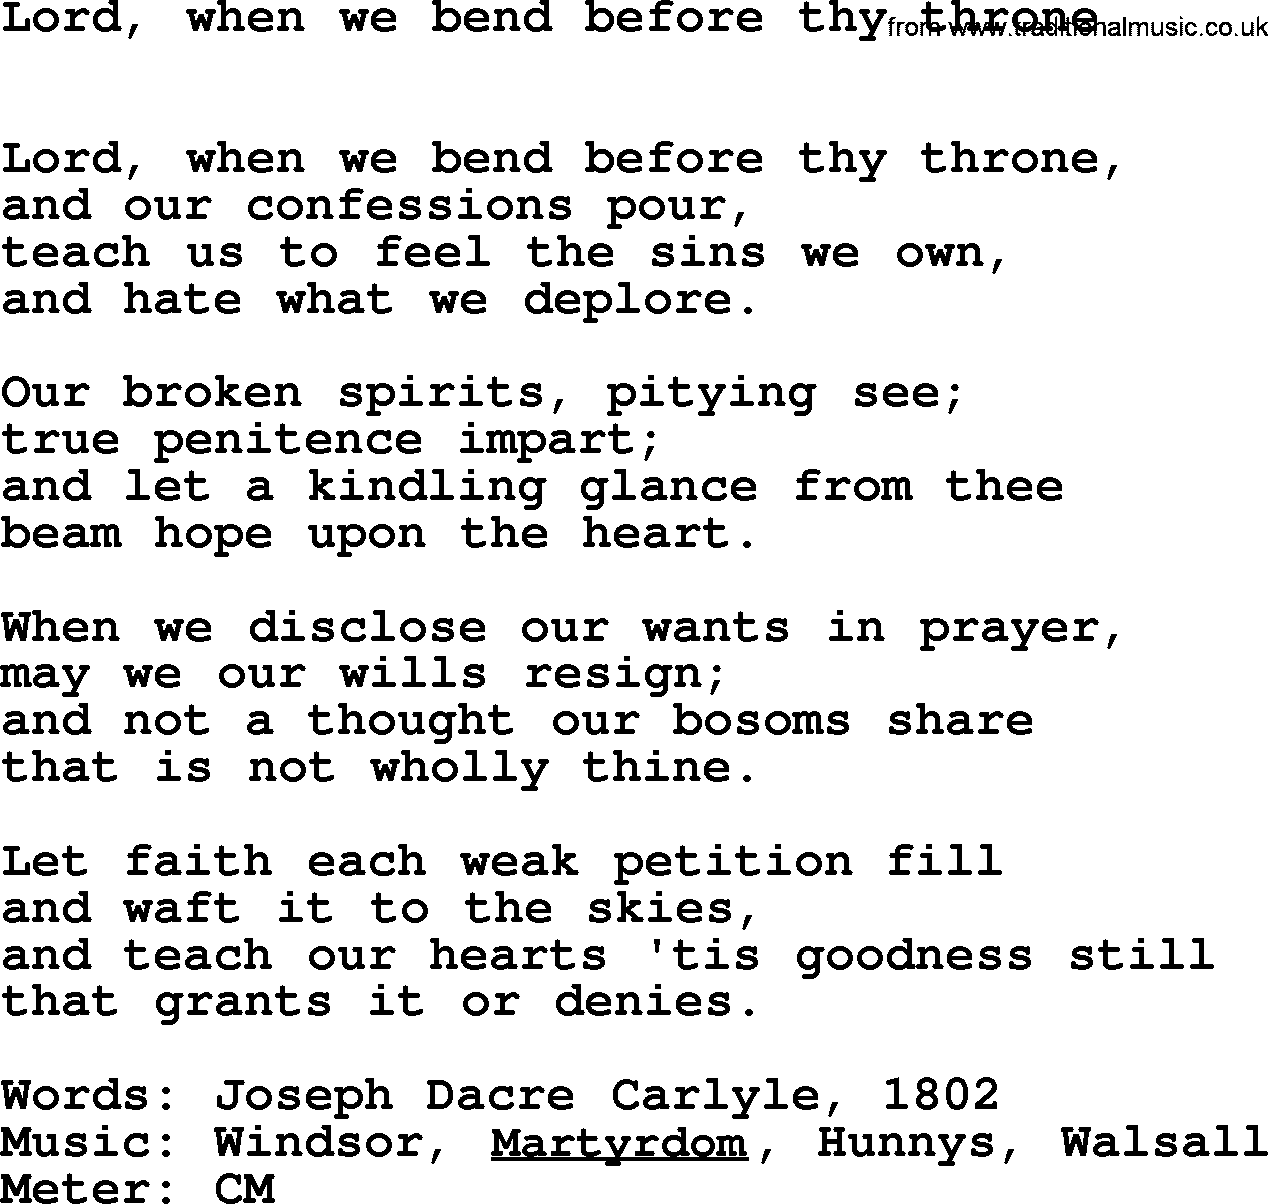 Book of Common Praise Hymn: Lord, When We Bend Before Thy Throne.txt lyrics with midi music